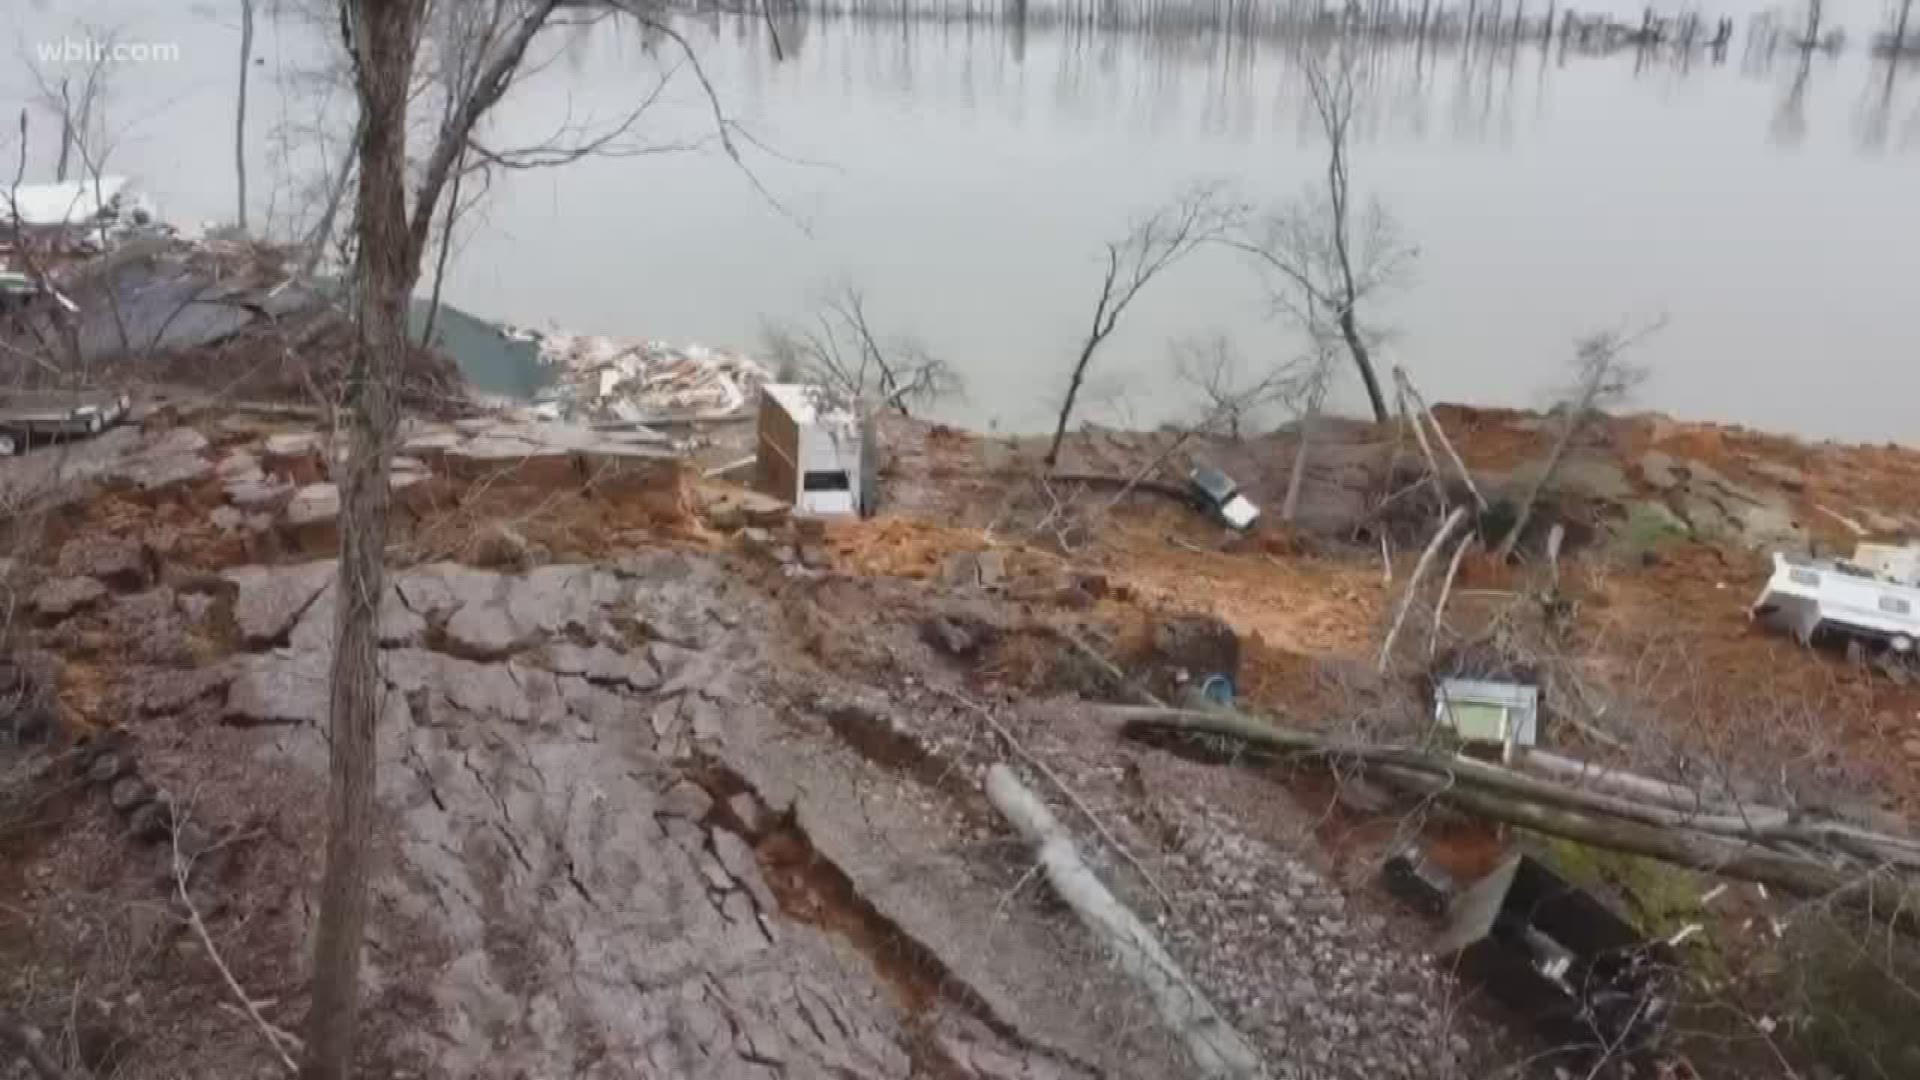 Officials in southwest Tennessee say a landslide destroyed two houses. This happened in Hardin County last night.